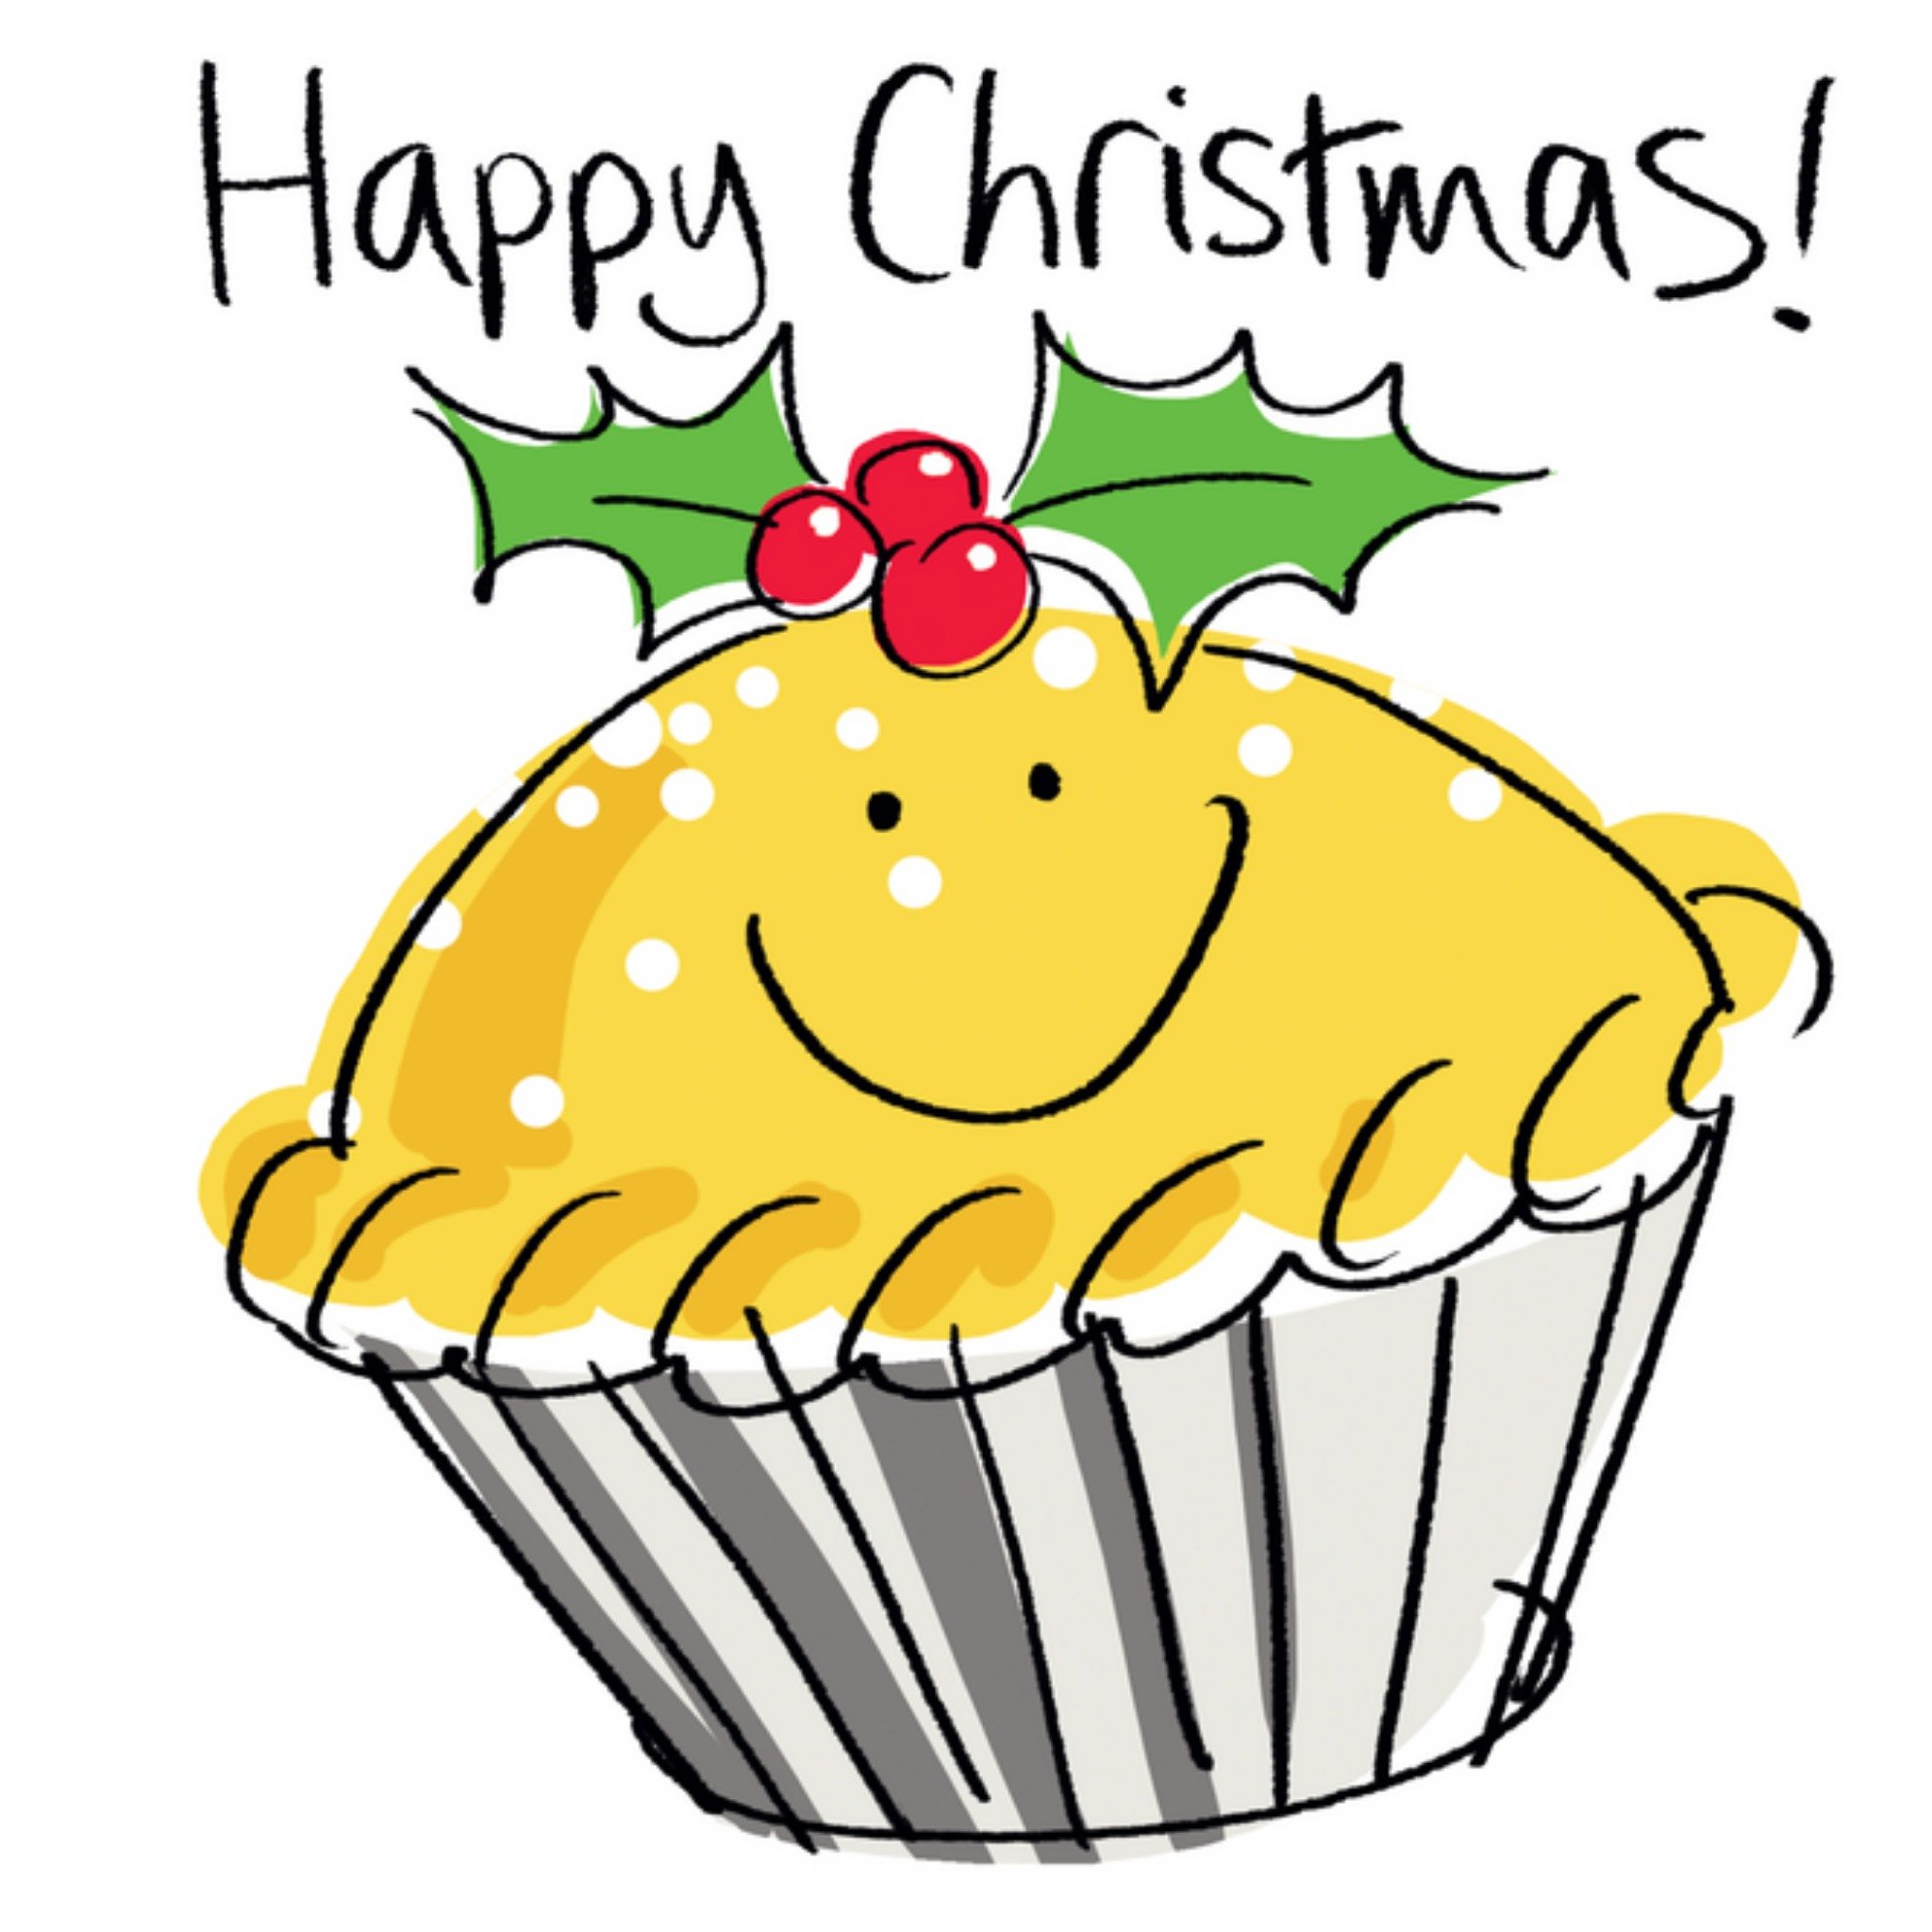 Moonpig Happy Christmas Mince Pie Illustrated Christmas Card, Square